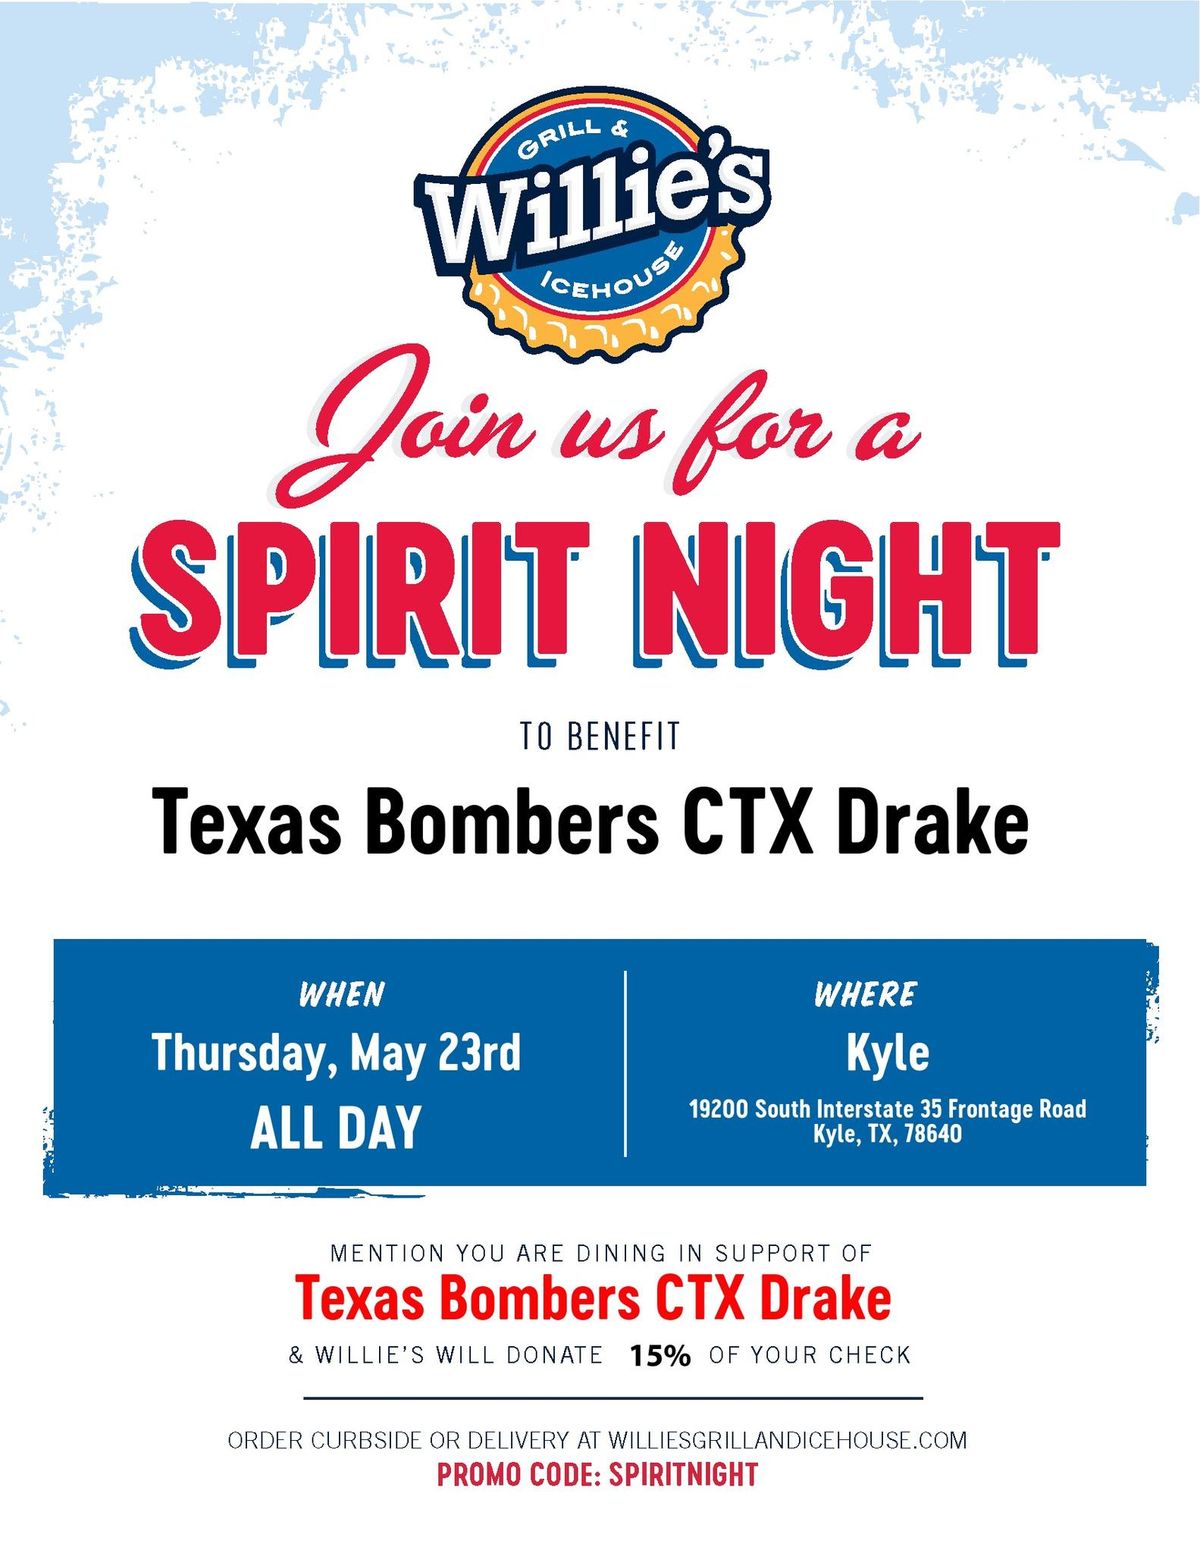 Spirit night at Willie's Grill & Icehouse! 